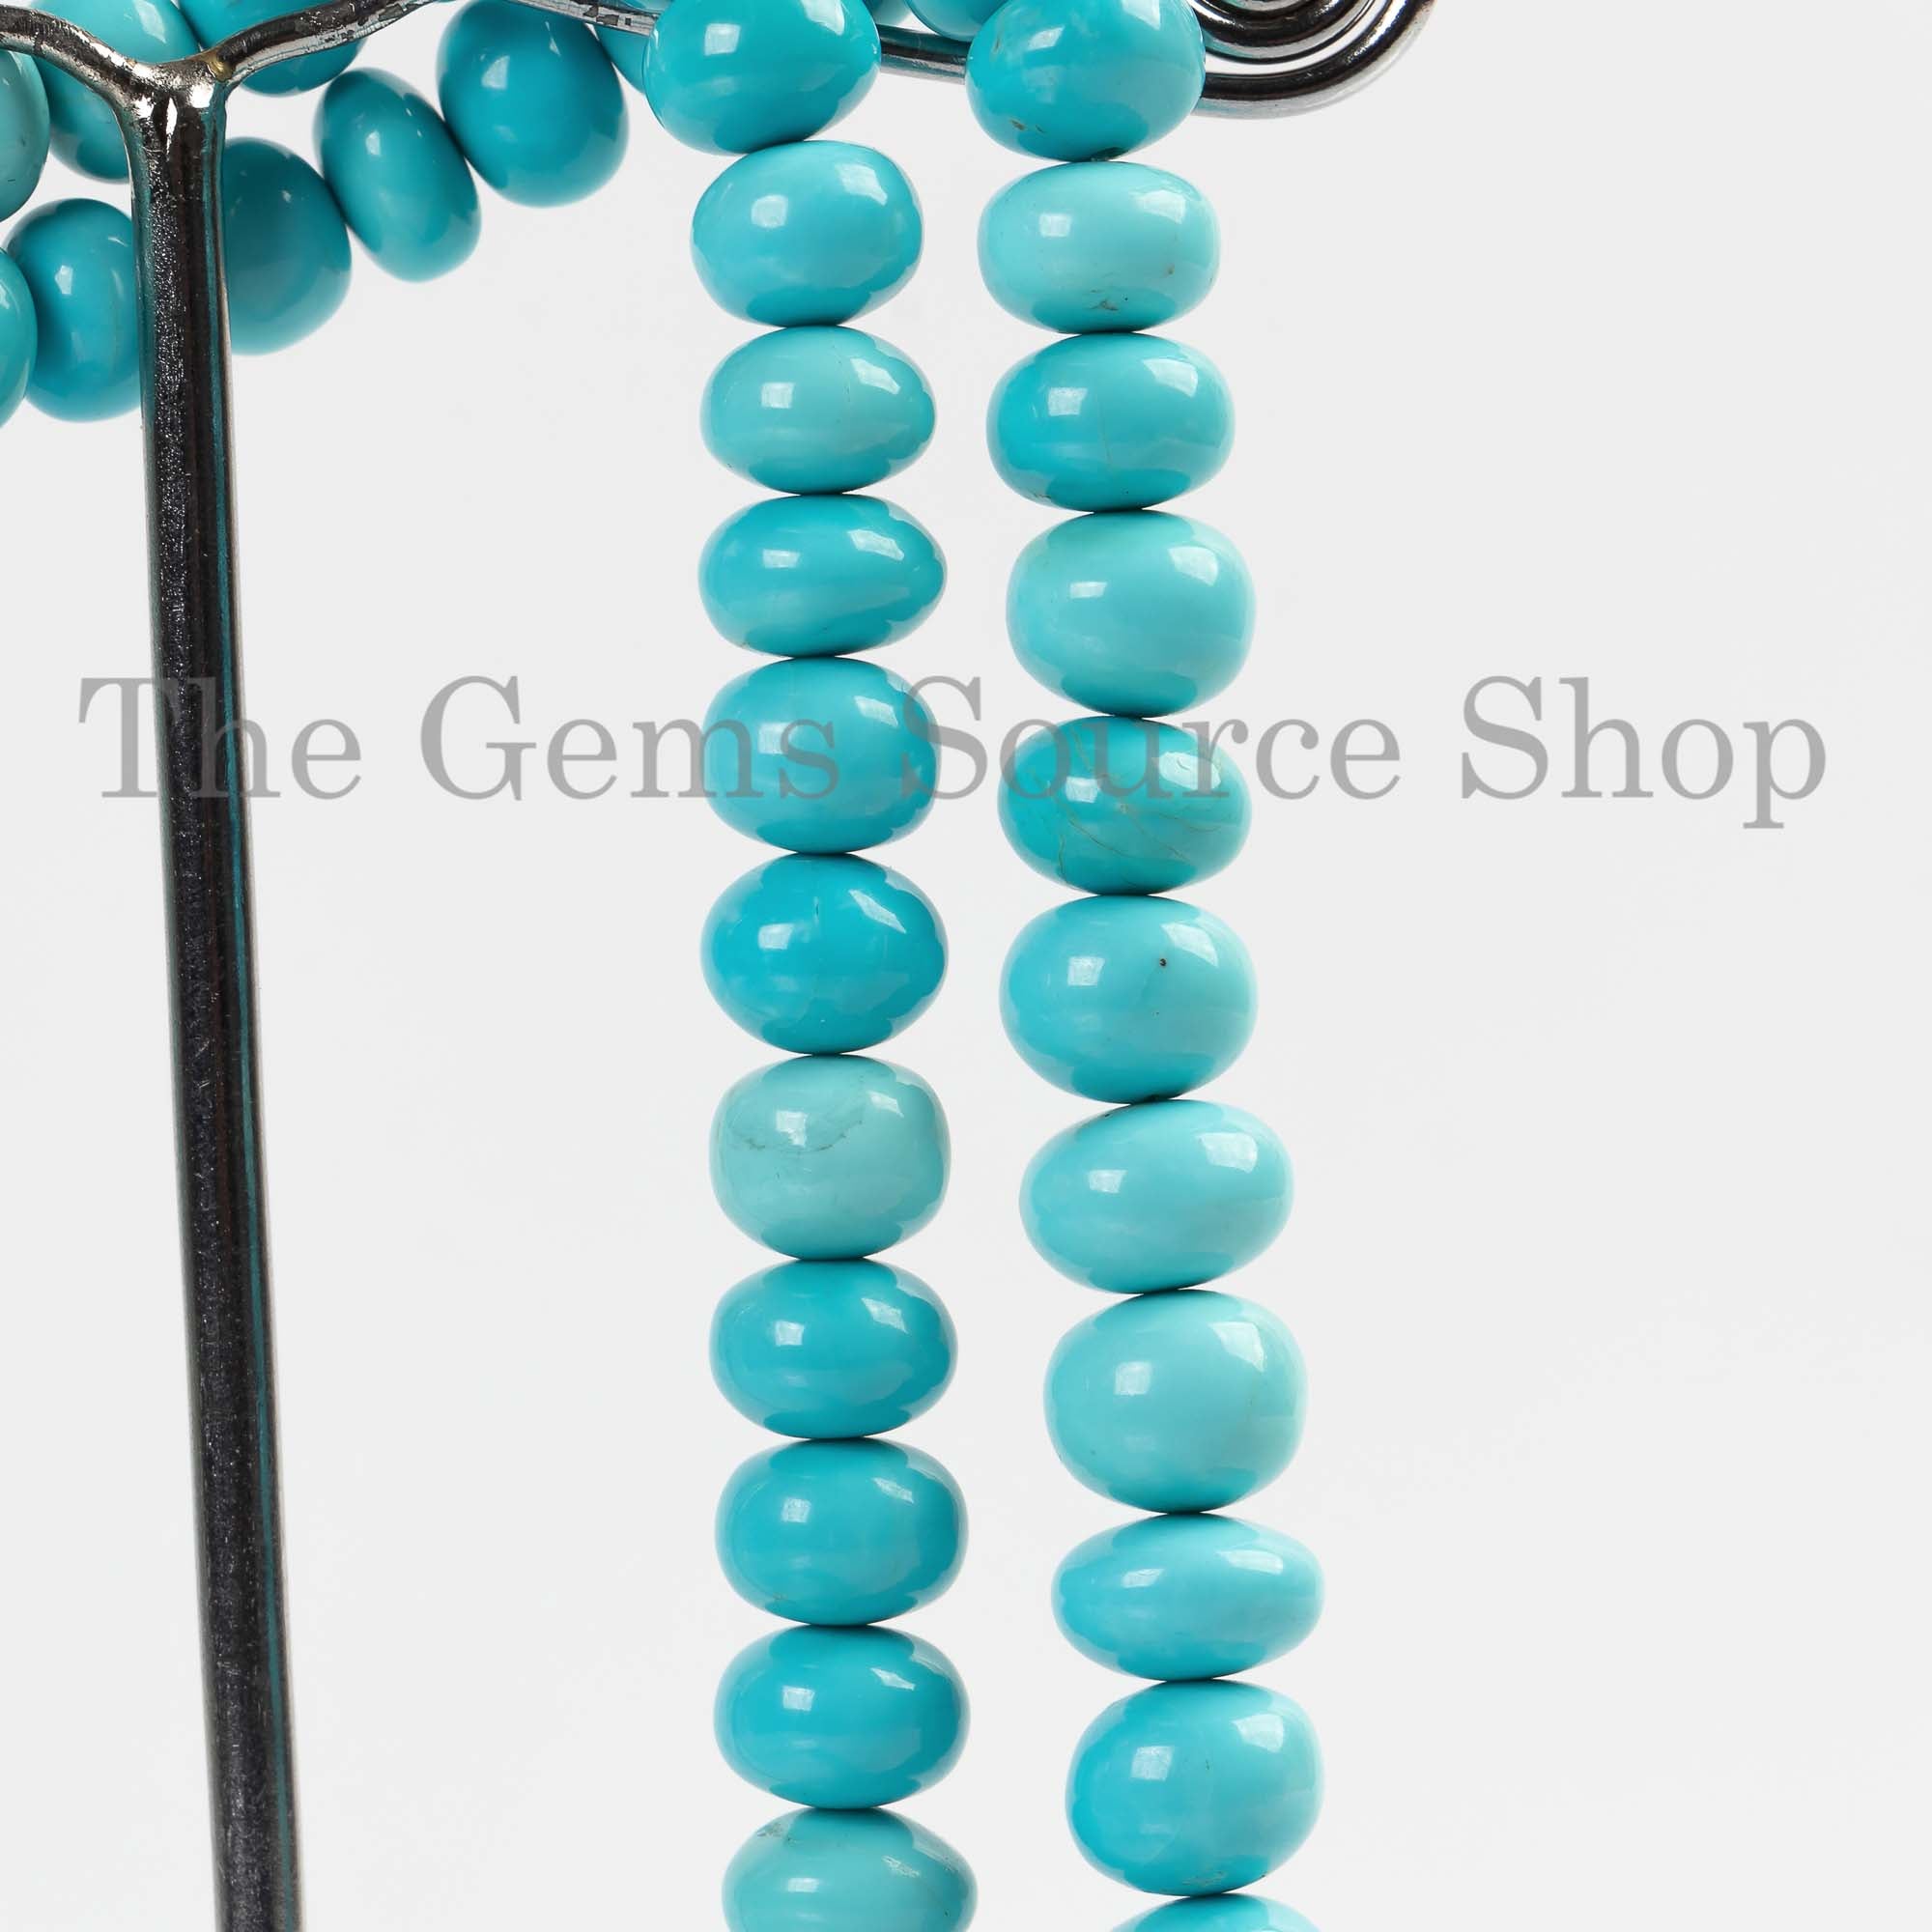 5.5-12mm Turquoise Smooth Necklace, Turquoise Rondelle Necklace, Turquoise Beaded Necklace, Turquoise Jewelry, Christmas Gifts, Gift For Her